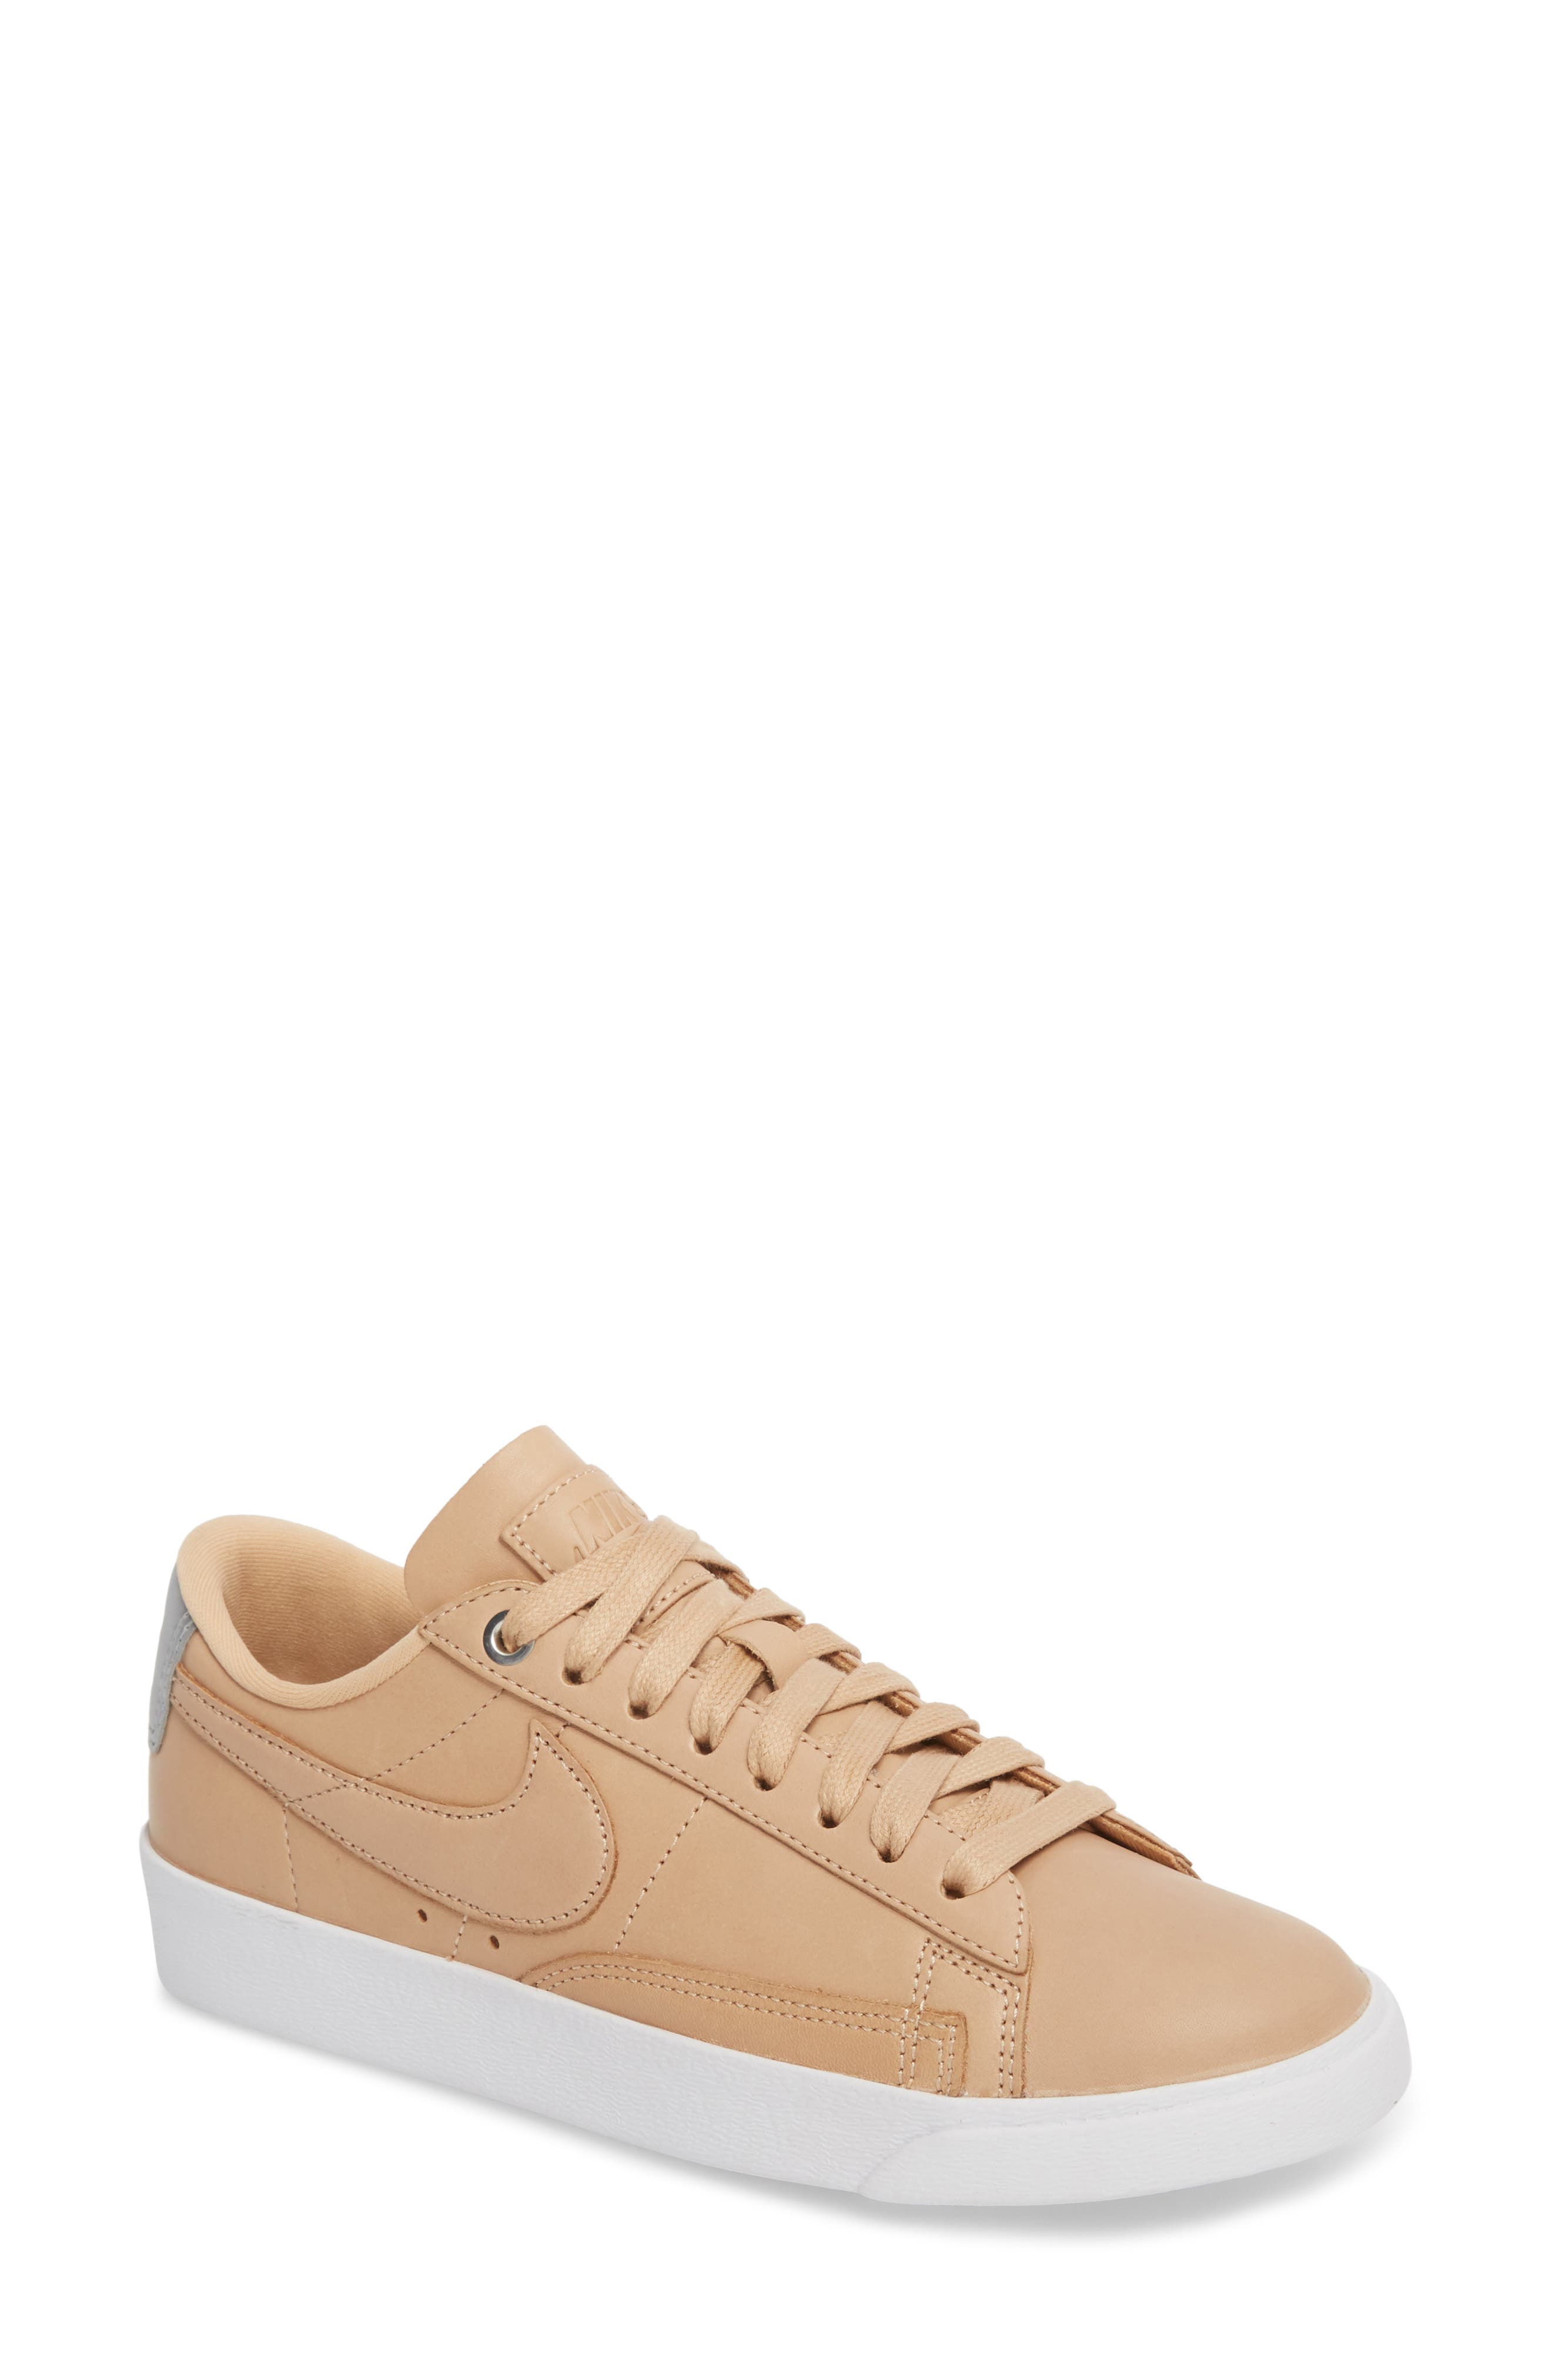 womens nike low top shoes